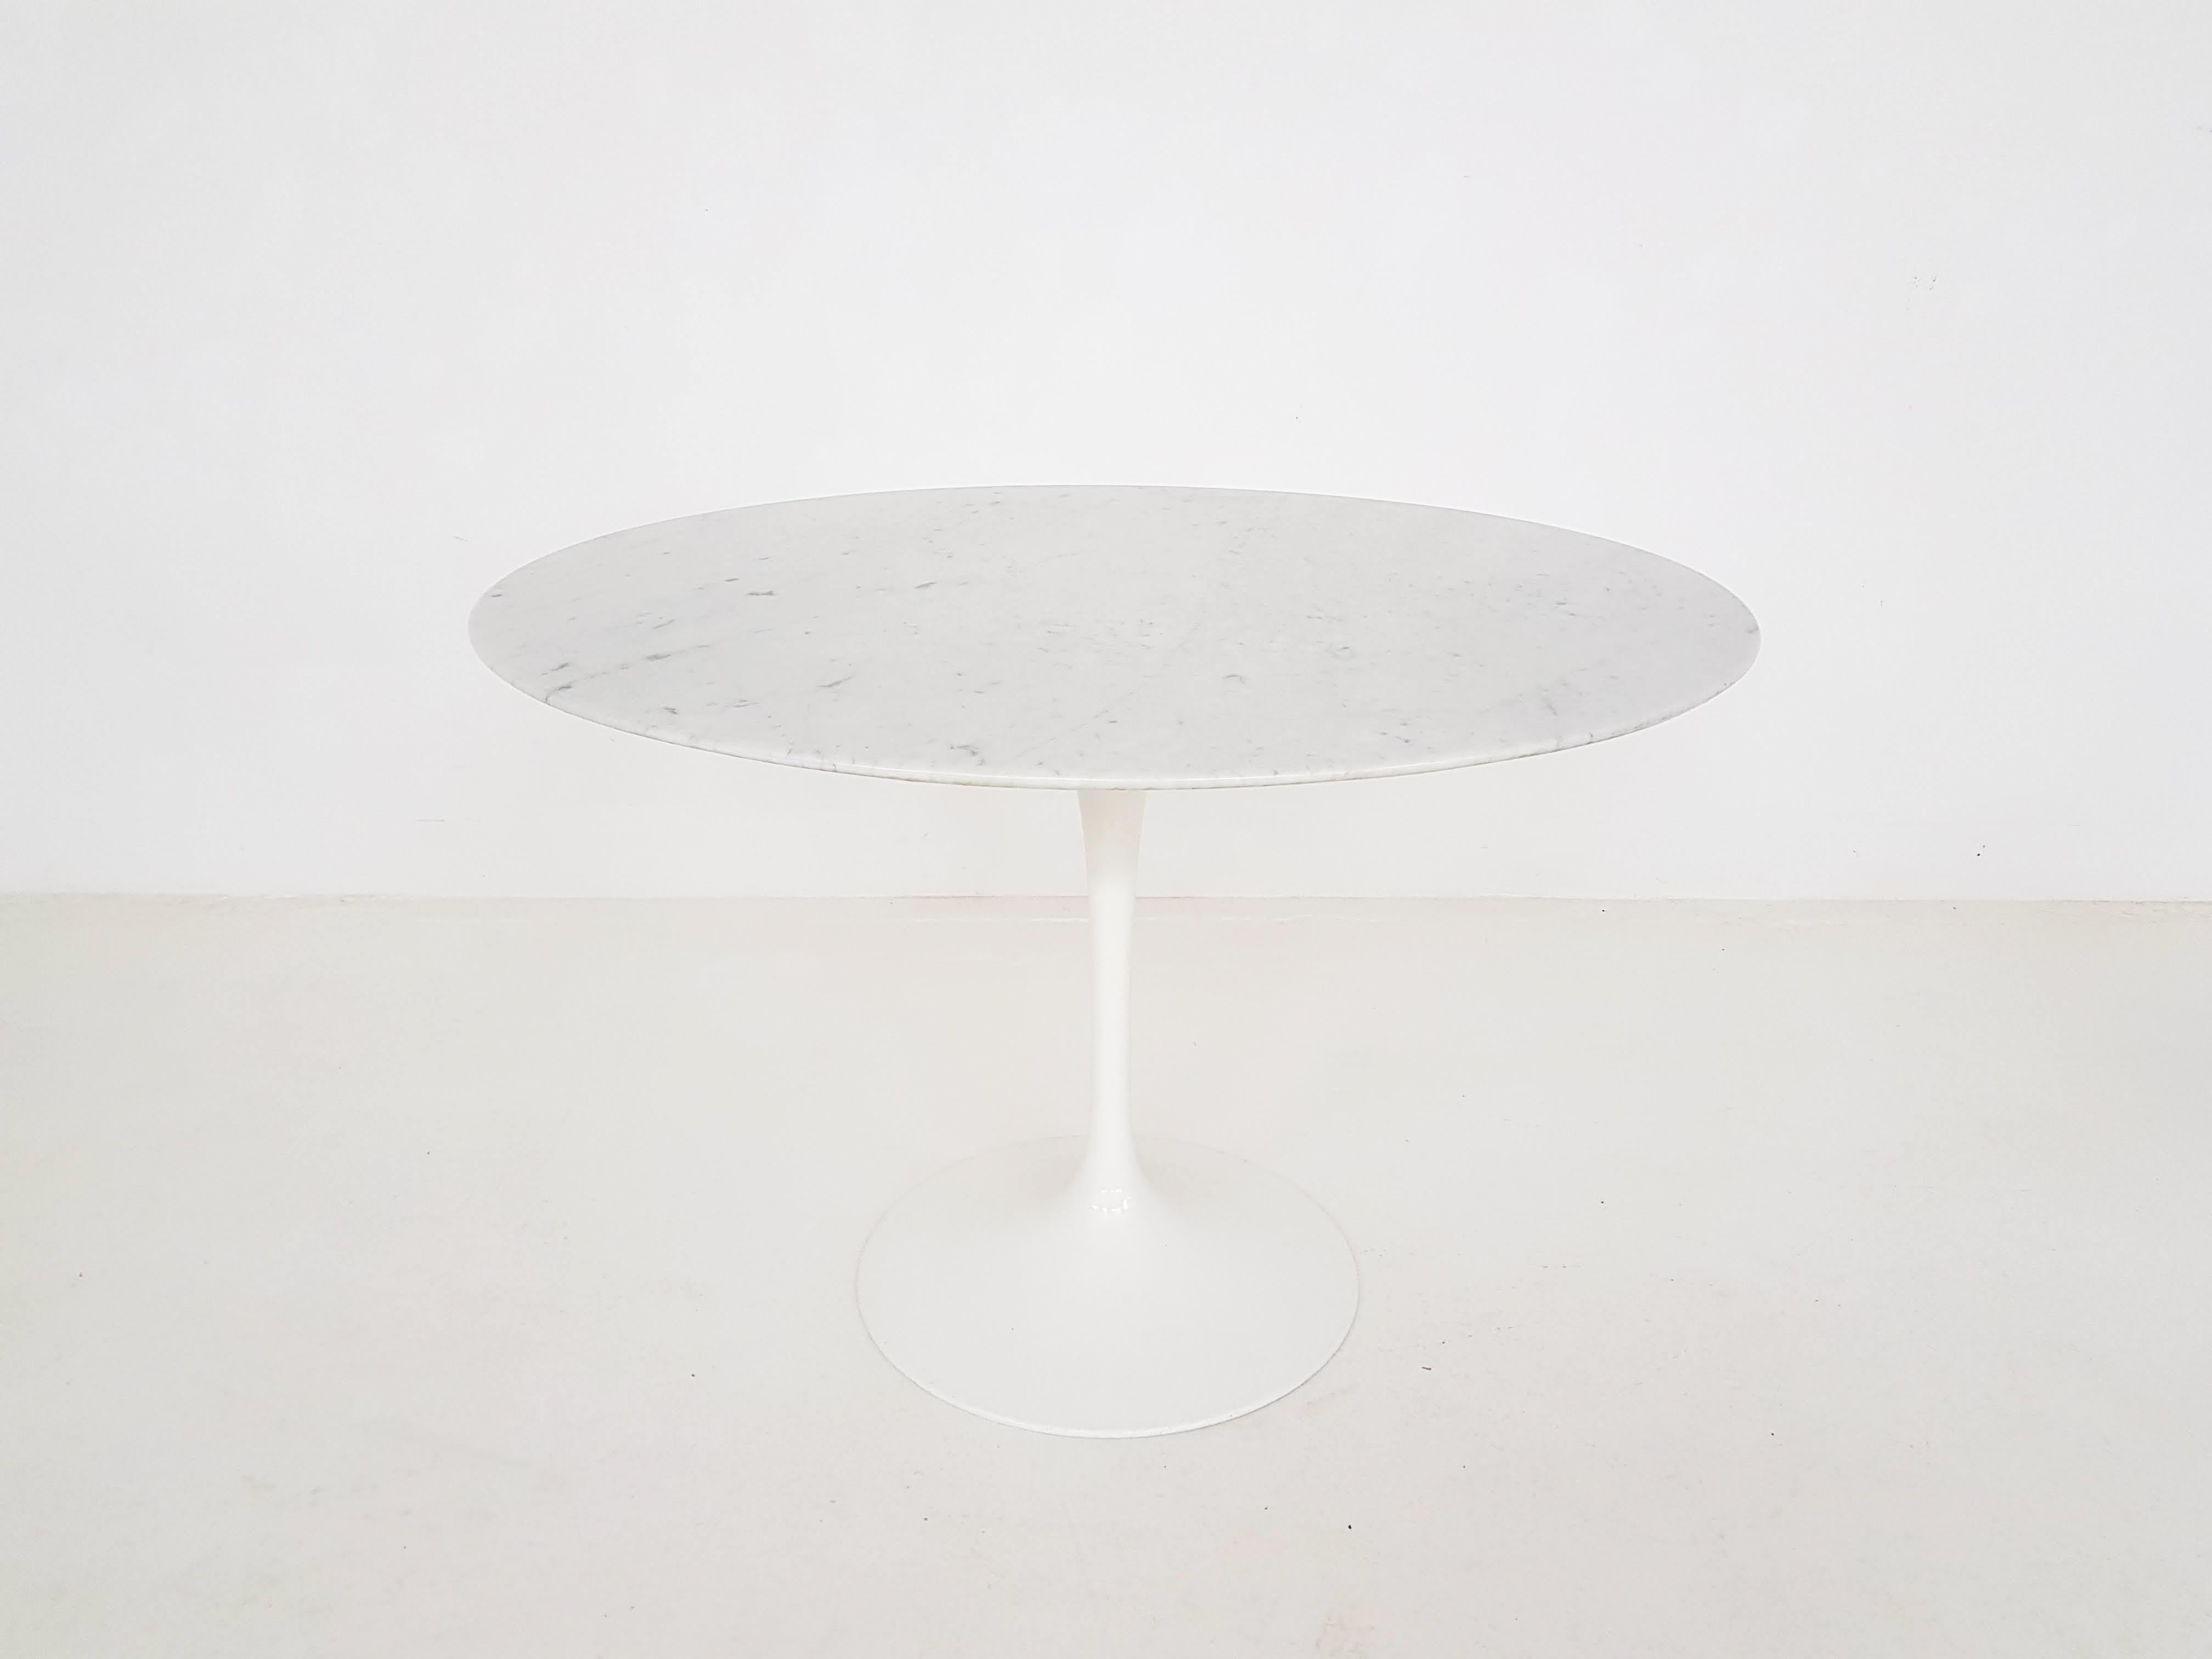 Original vintage marble Eero Saarinen tulip dining table for Knoll International, 1970s.

This is an authentic and fully original dining table from Eero Saarinen for Knoll International. It has the beautiful marble top with polyester coating and